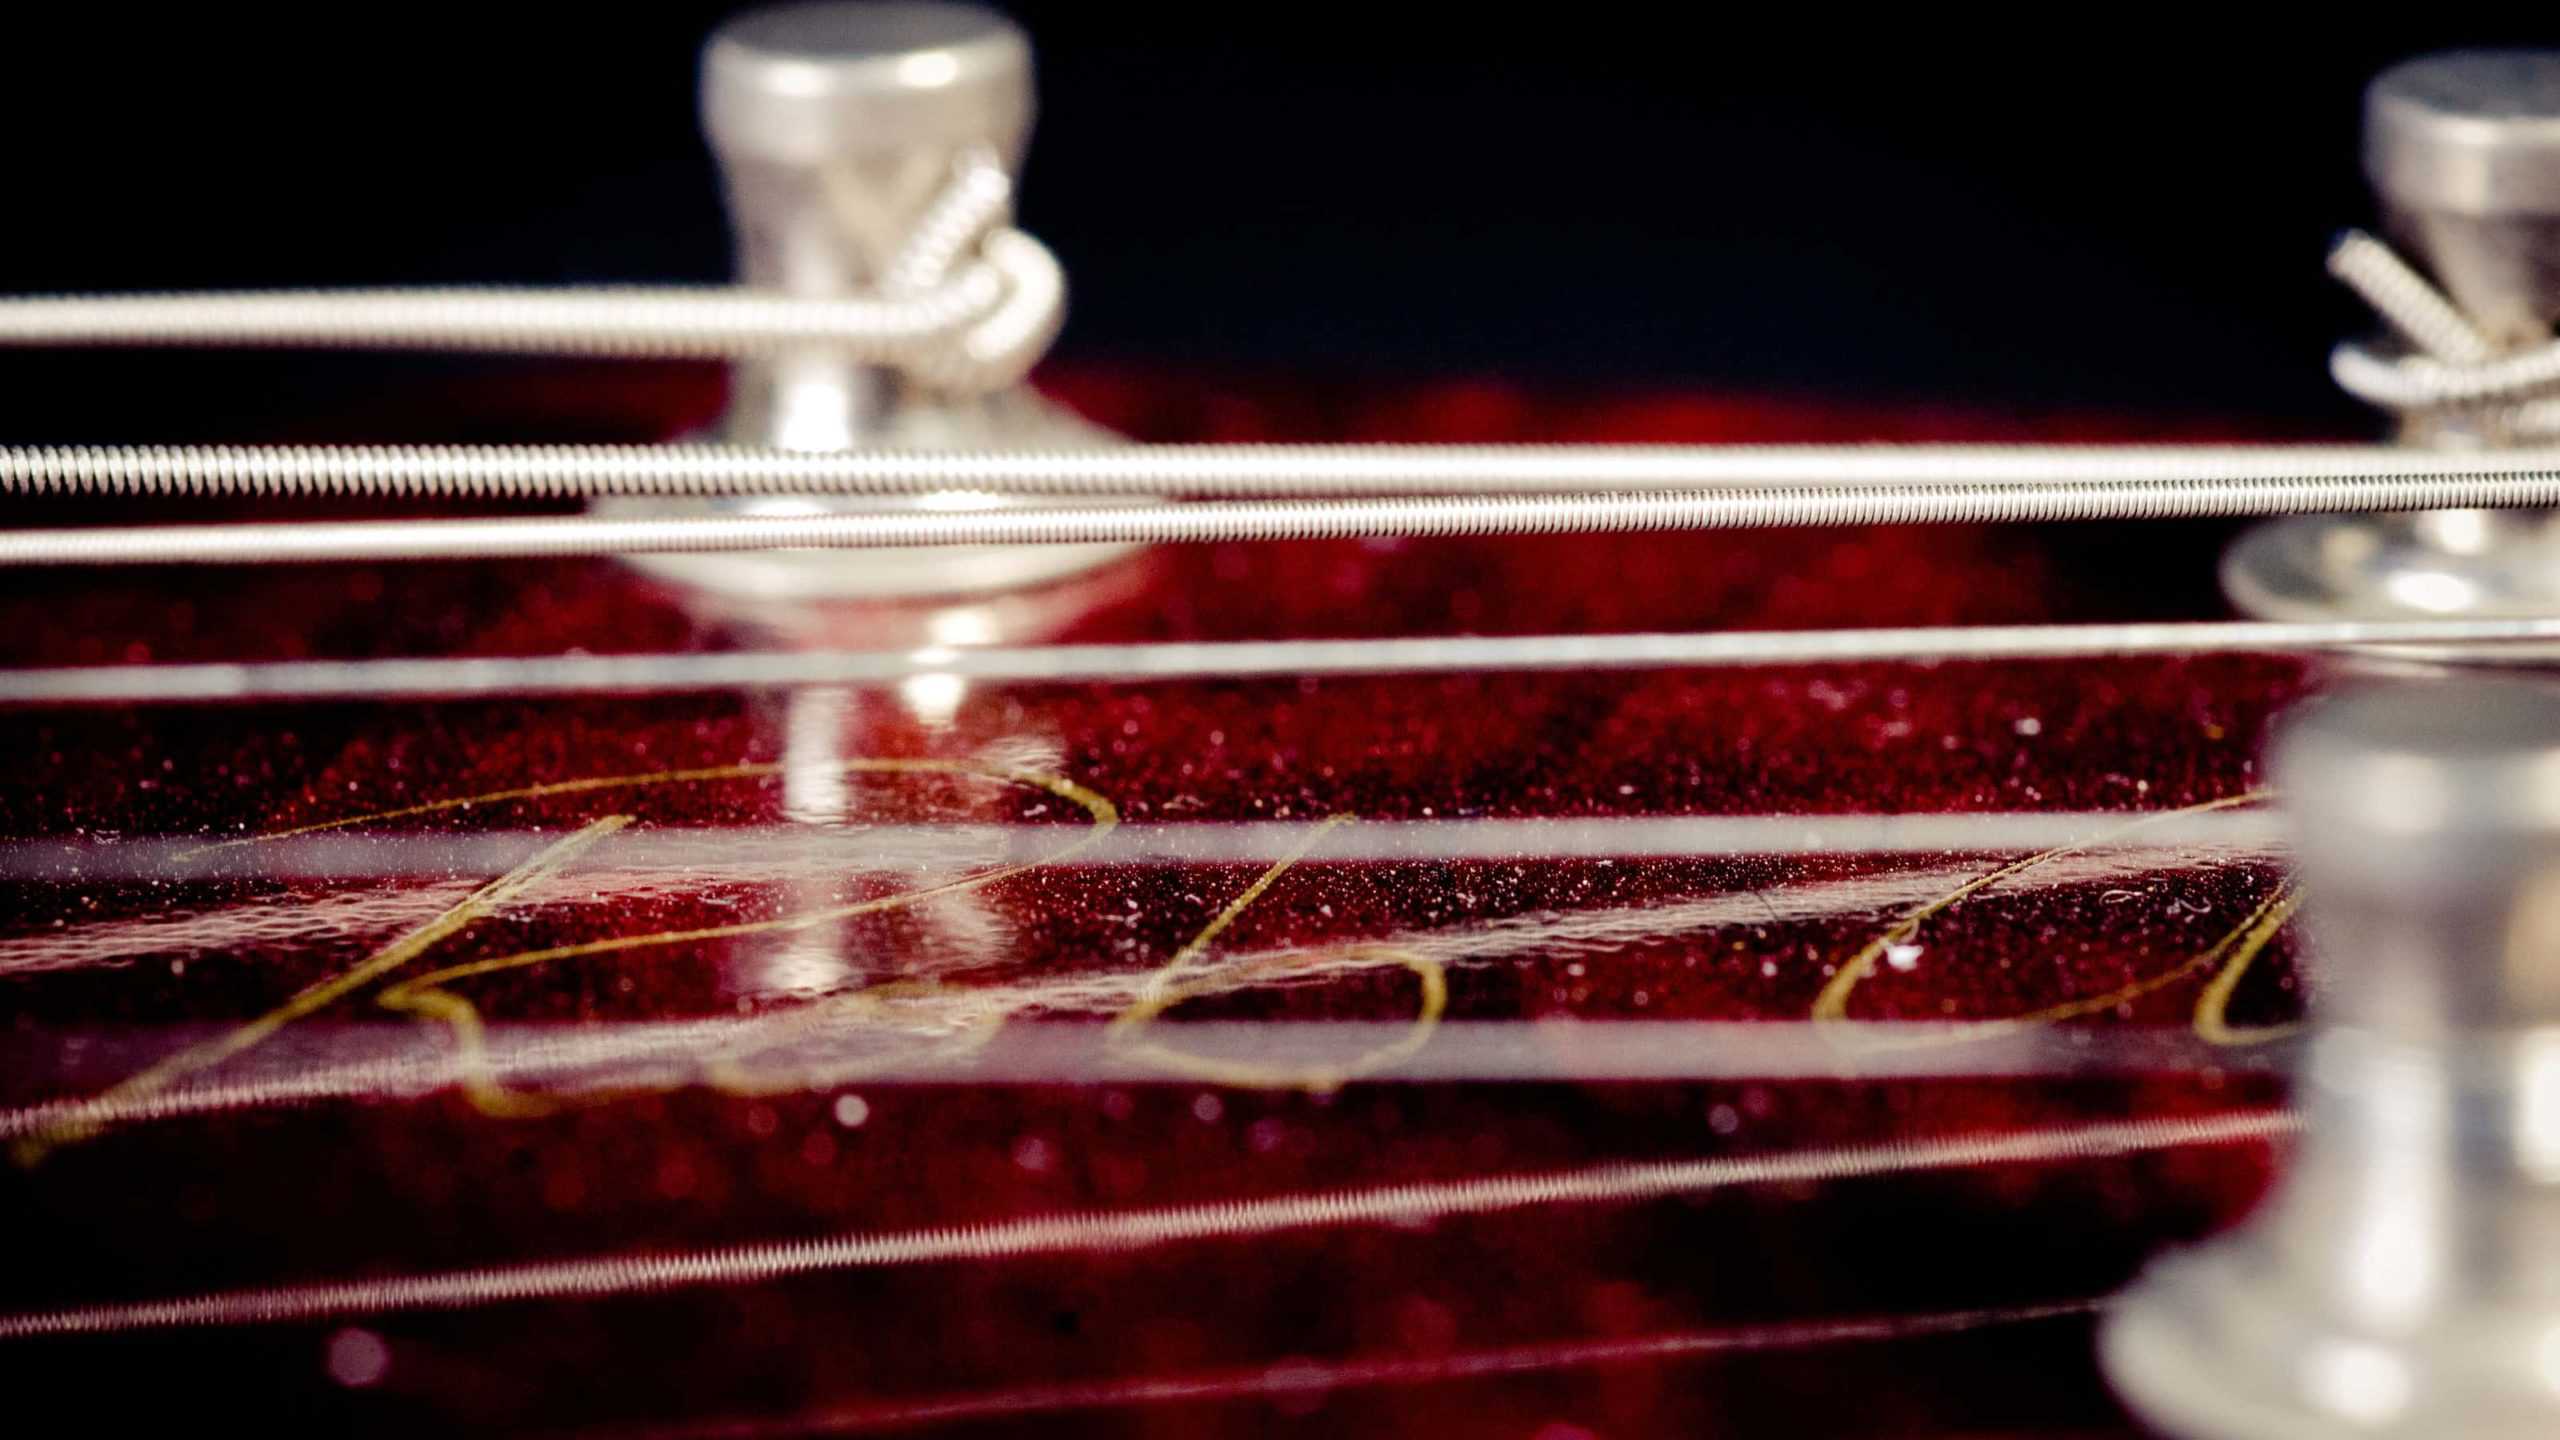 Close up, the strings and pegs of an electric guitar gleam silver in the dark.